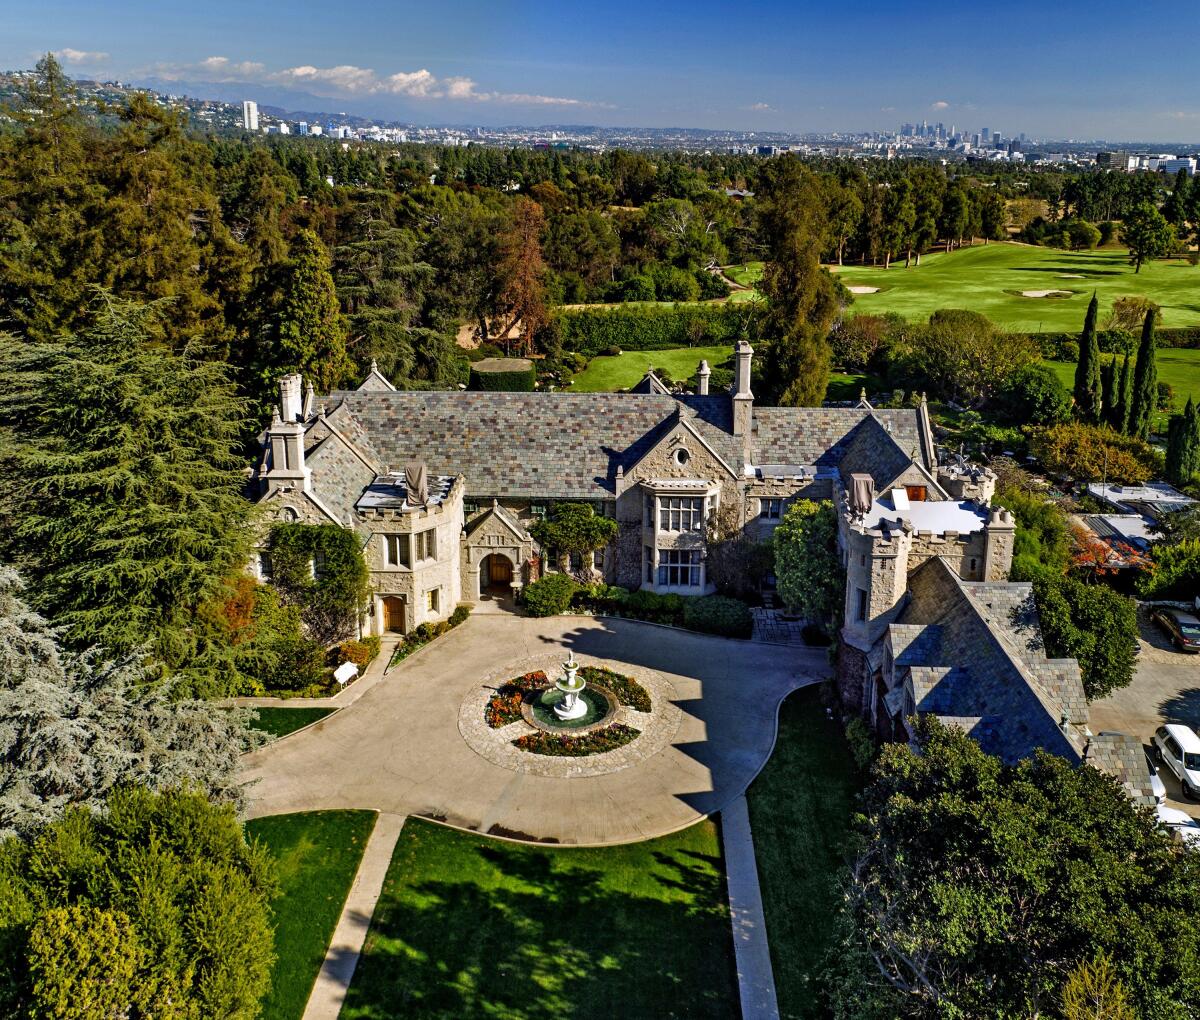 The Playboy Mansion sits near the 14th tee box at Los Angeles Country Club.